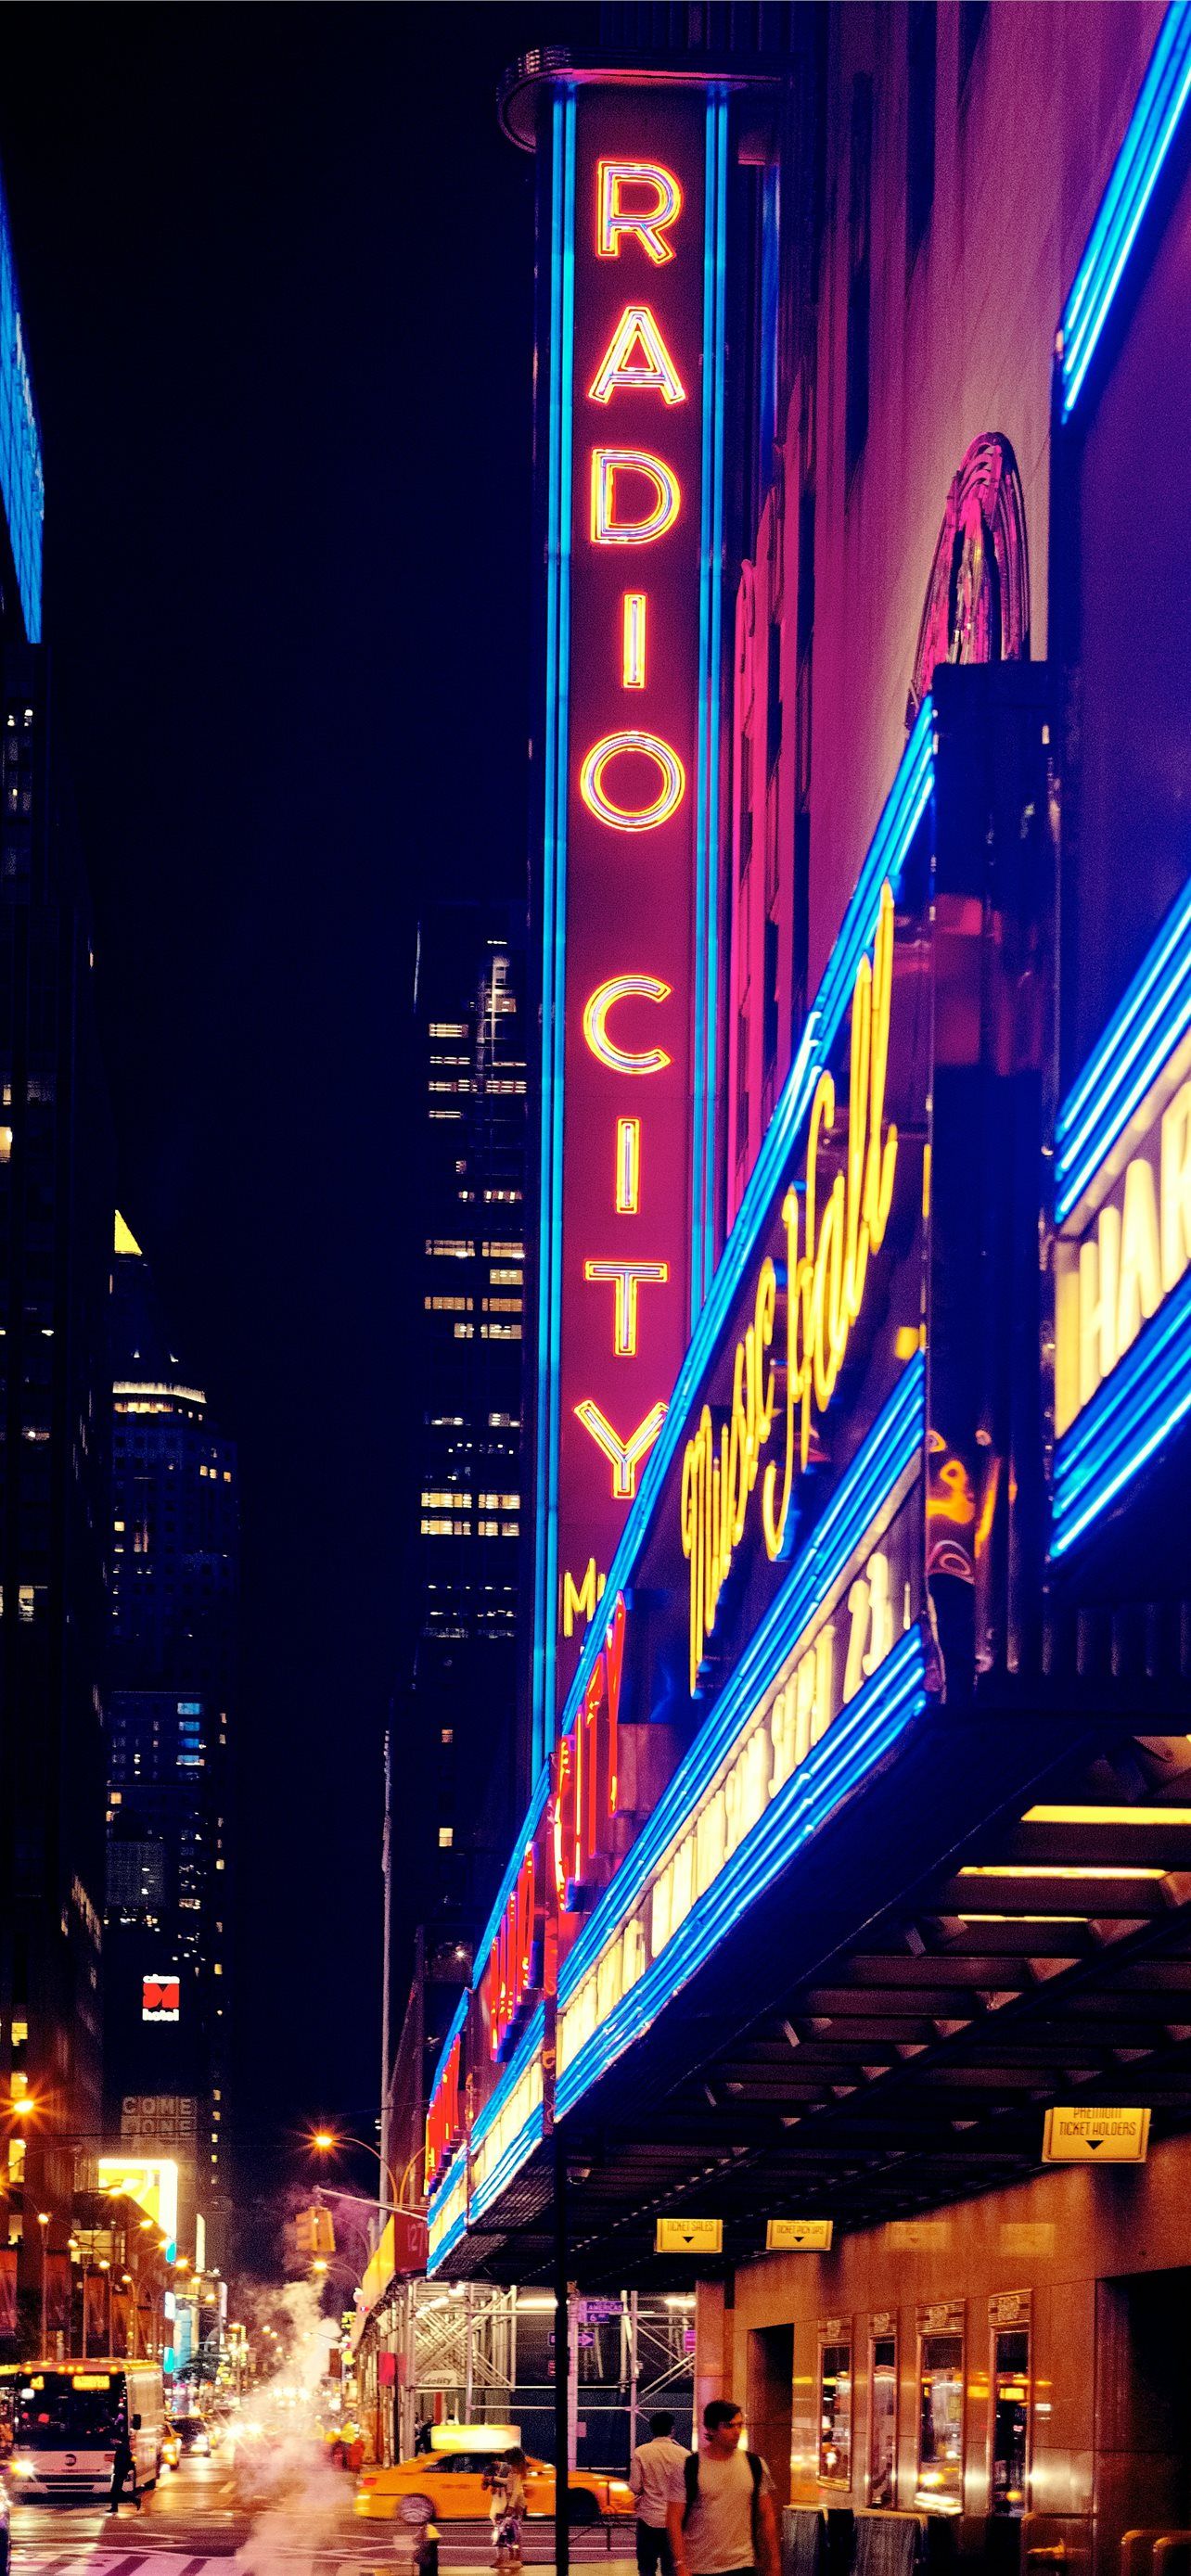 A neon sign for radio city music hall - Neon